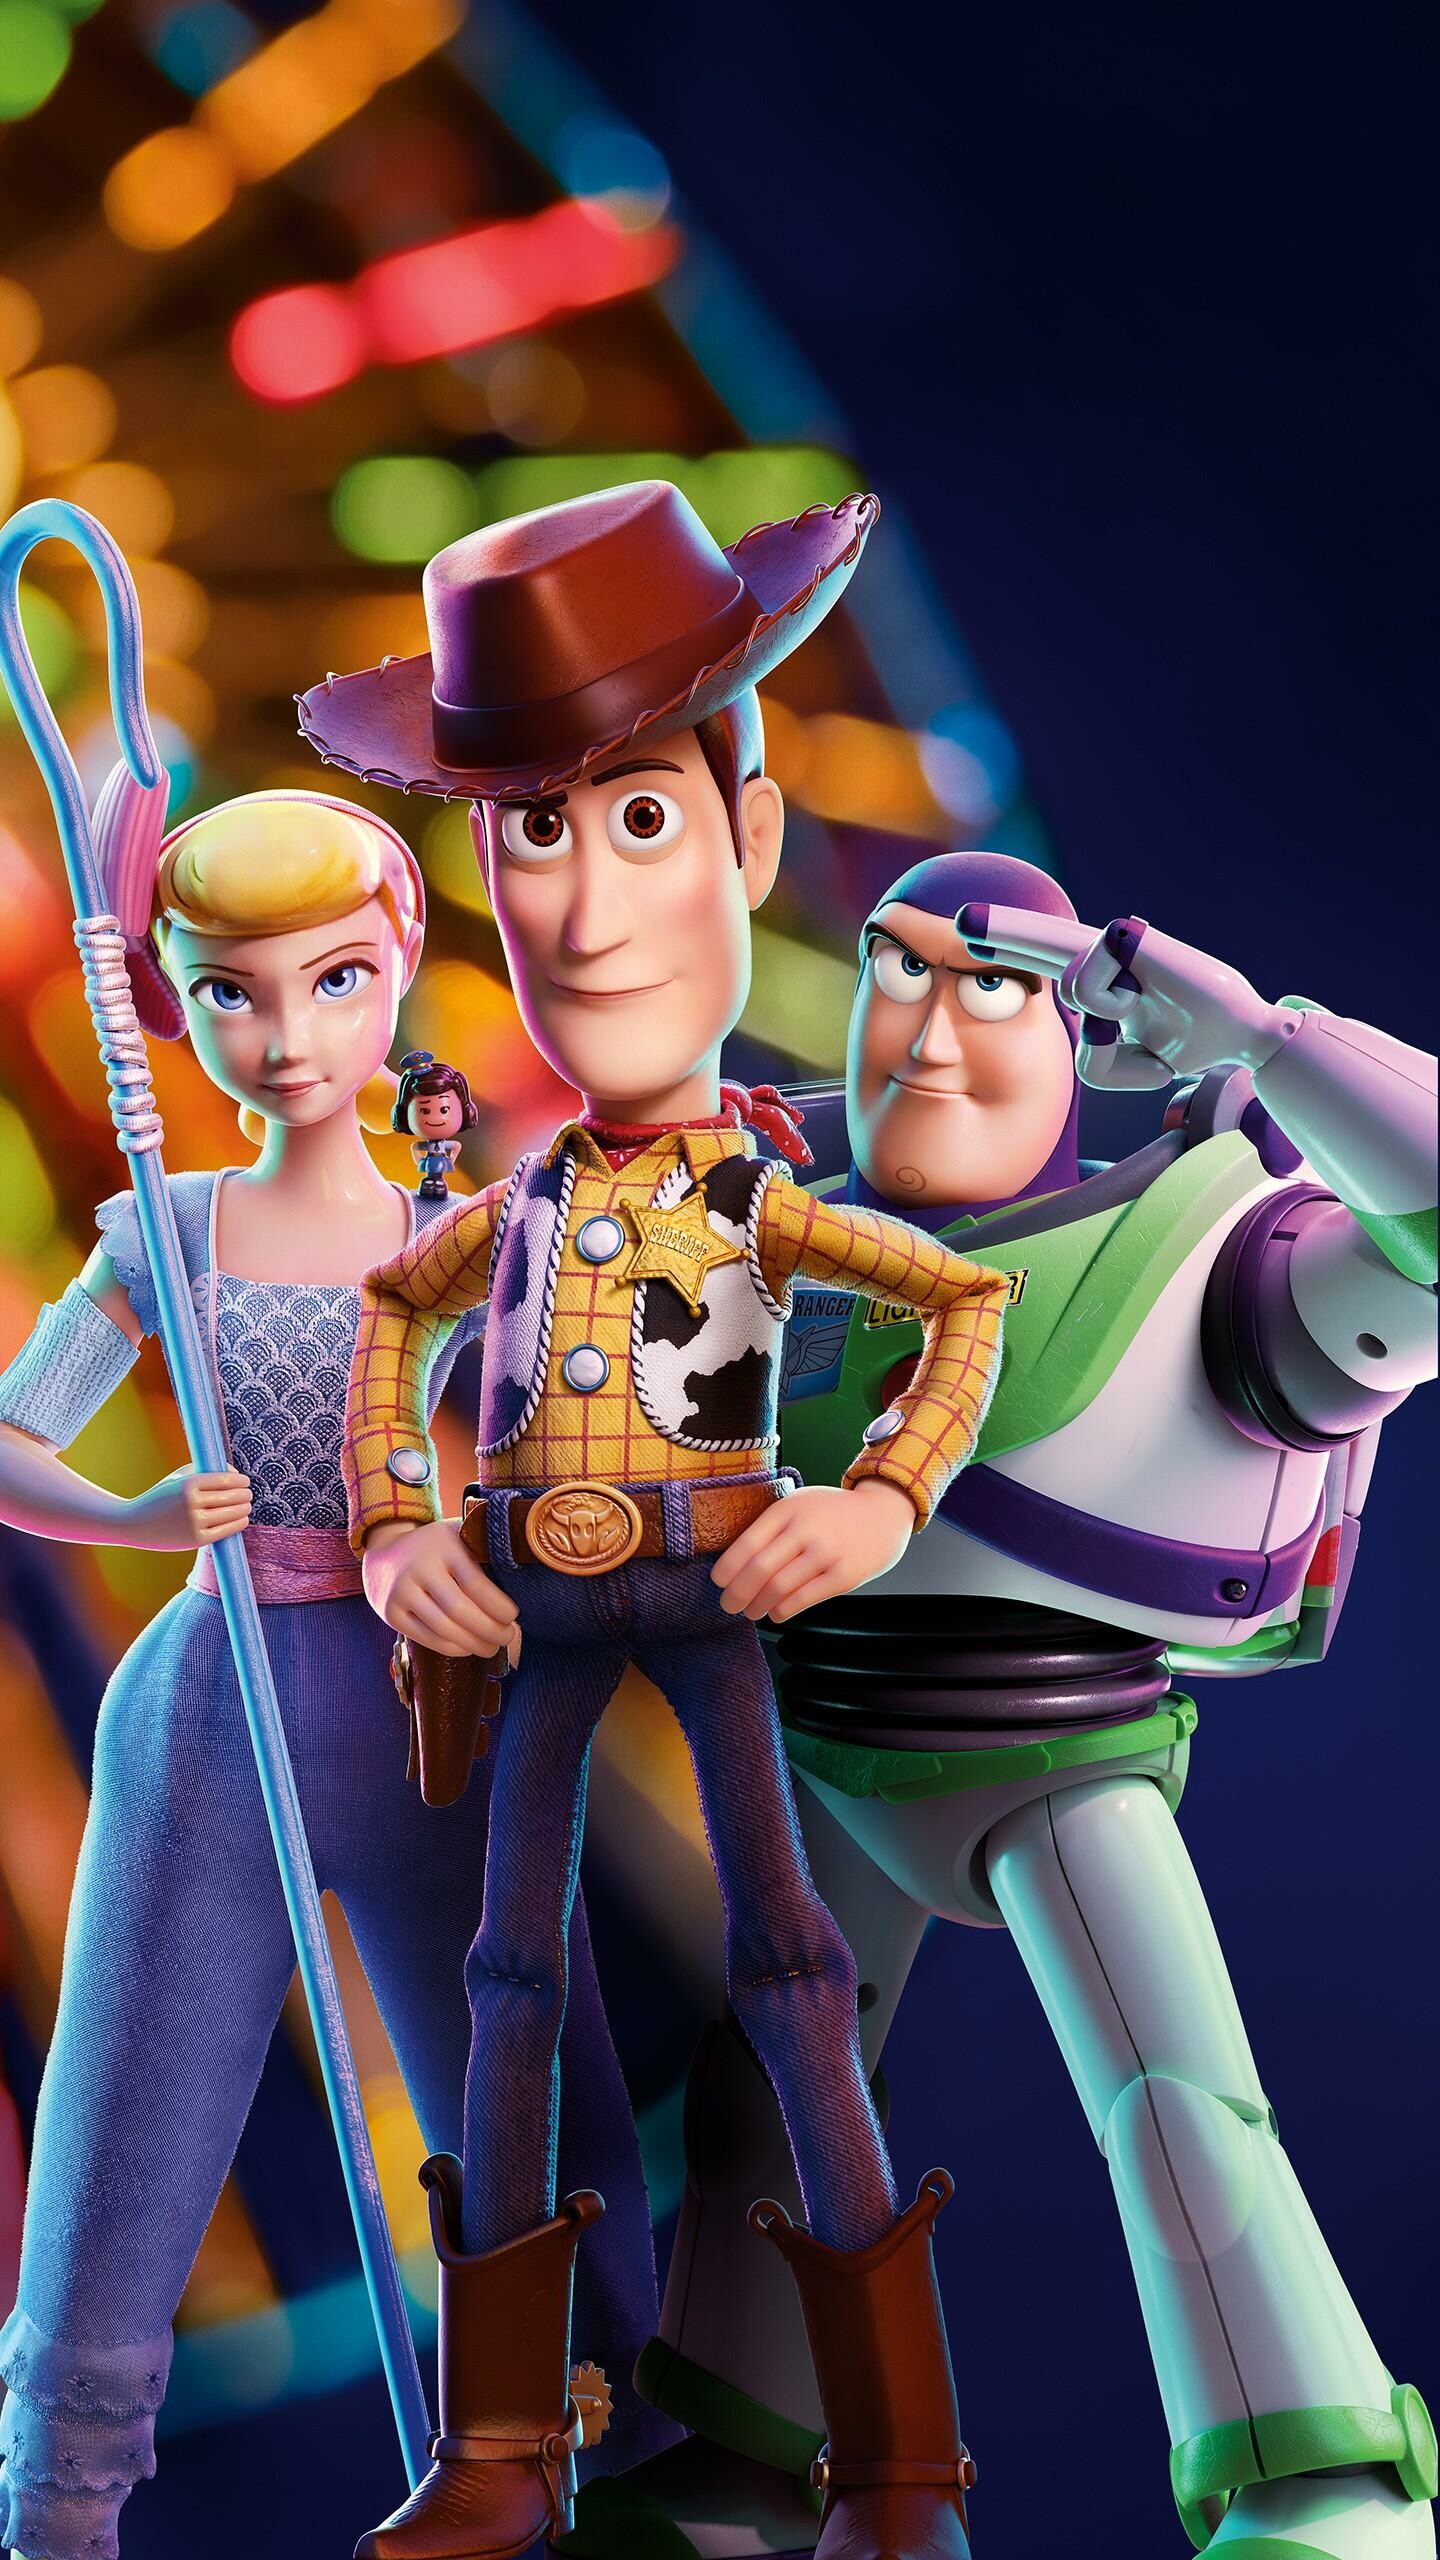 Toy Story on Android, Fun wallpapers, Animated favorites, Toy Story magic, 1440x2560 HD Phone